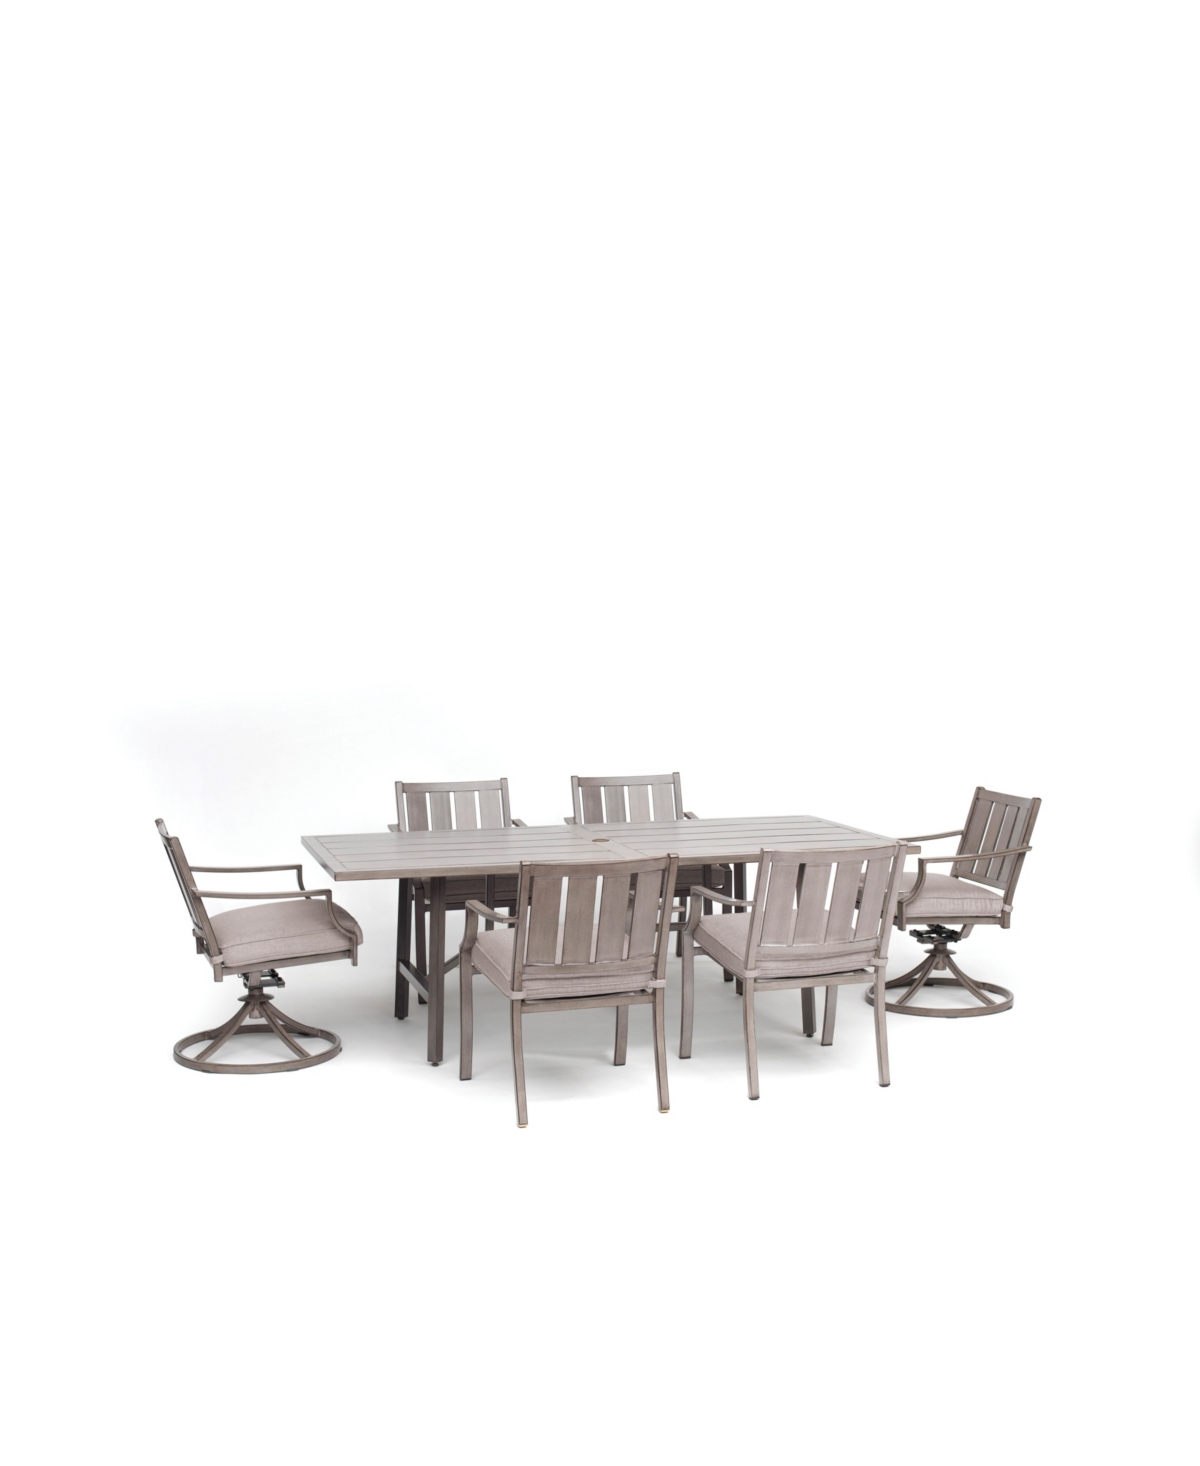 Agio Wayland Outdoor 7-pc. Dining Set (84" X 42" Rectangle Dining Table, 4 Dining Chairs & 2 Swivel Chair In Remy Cloud